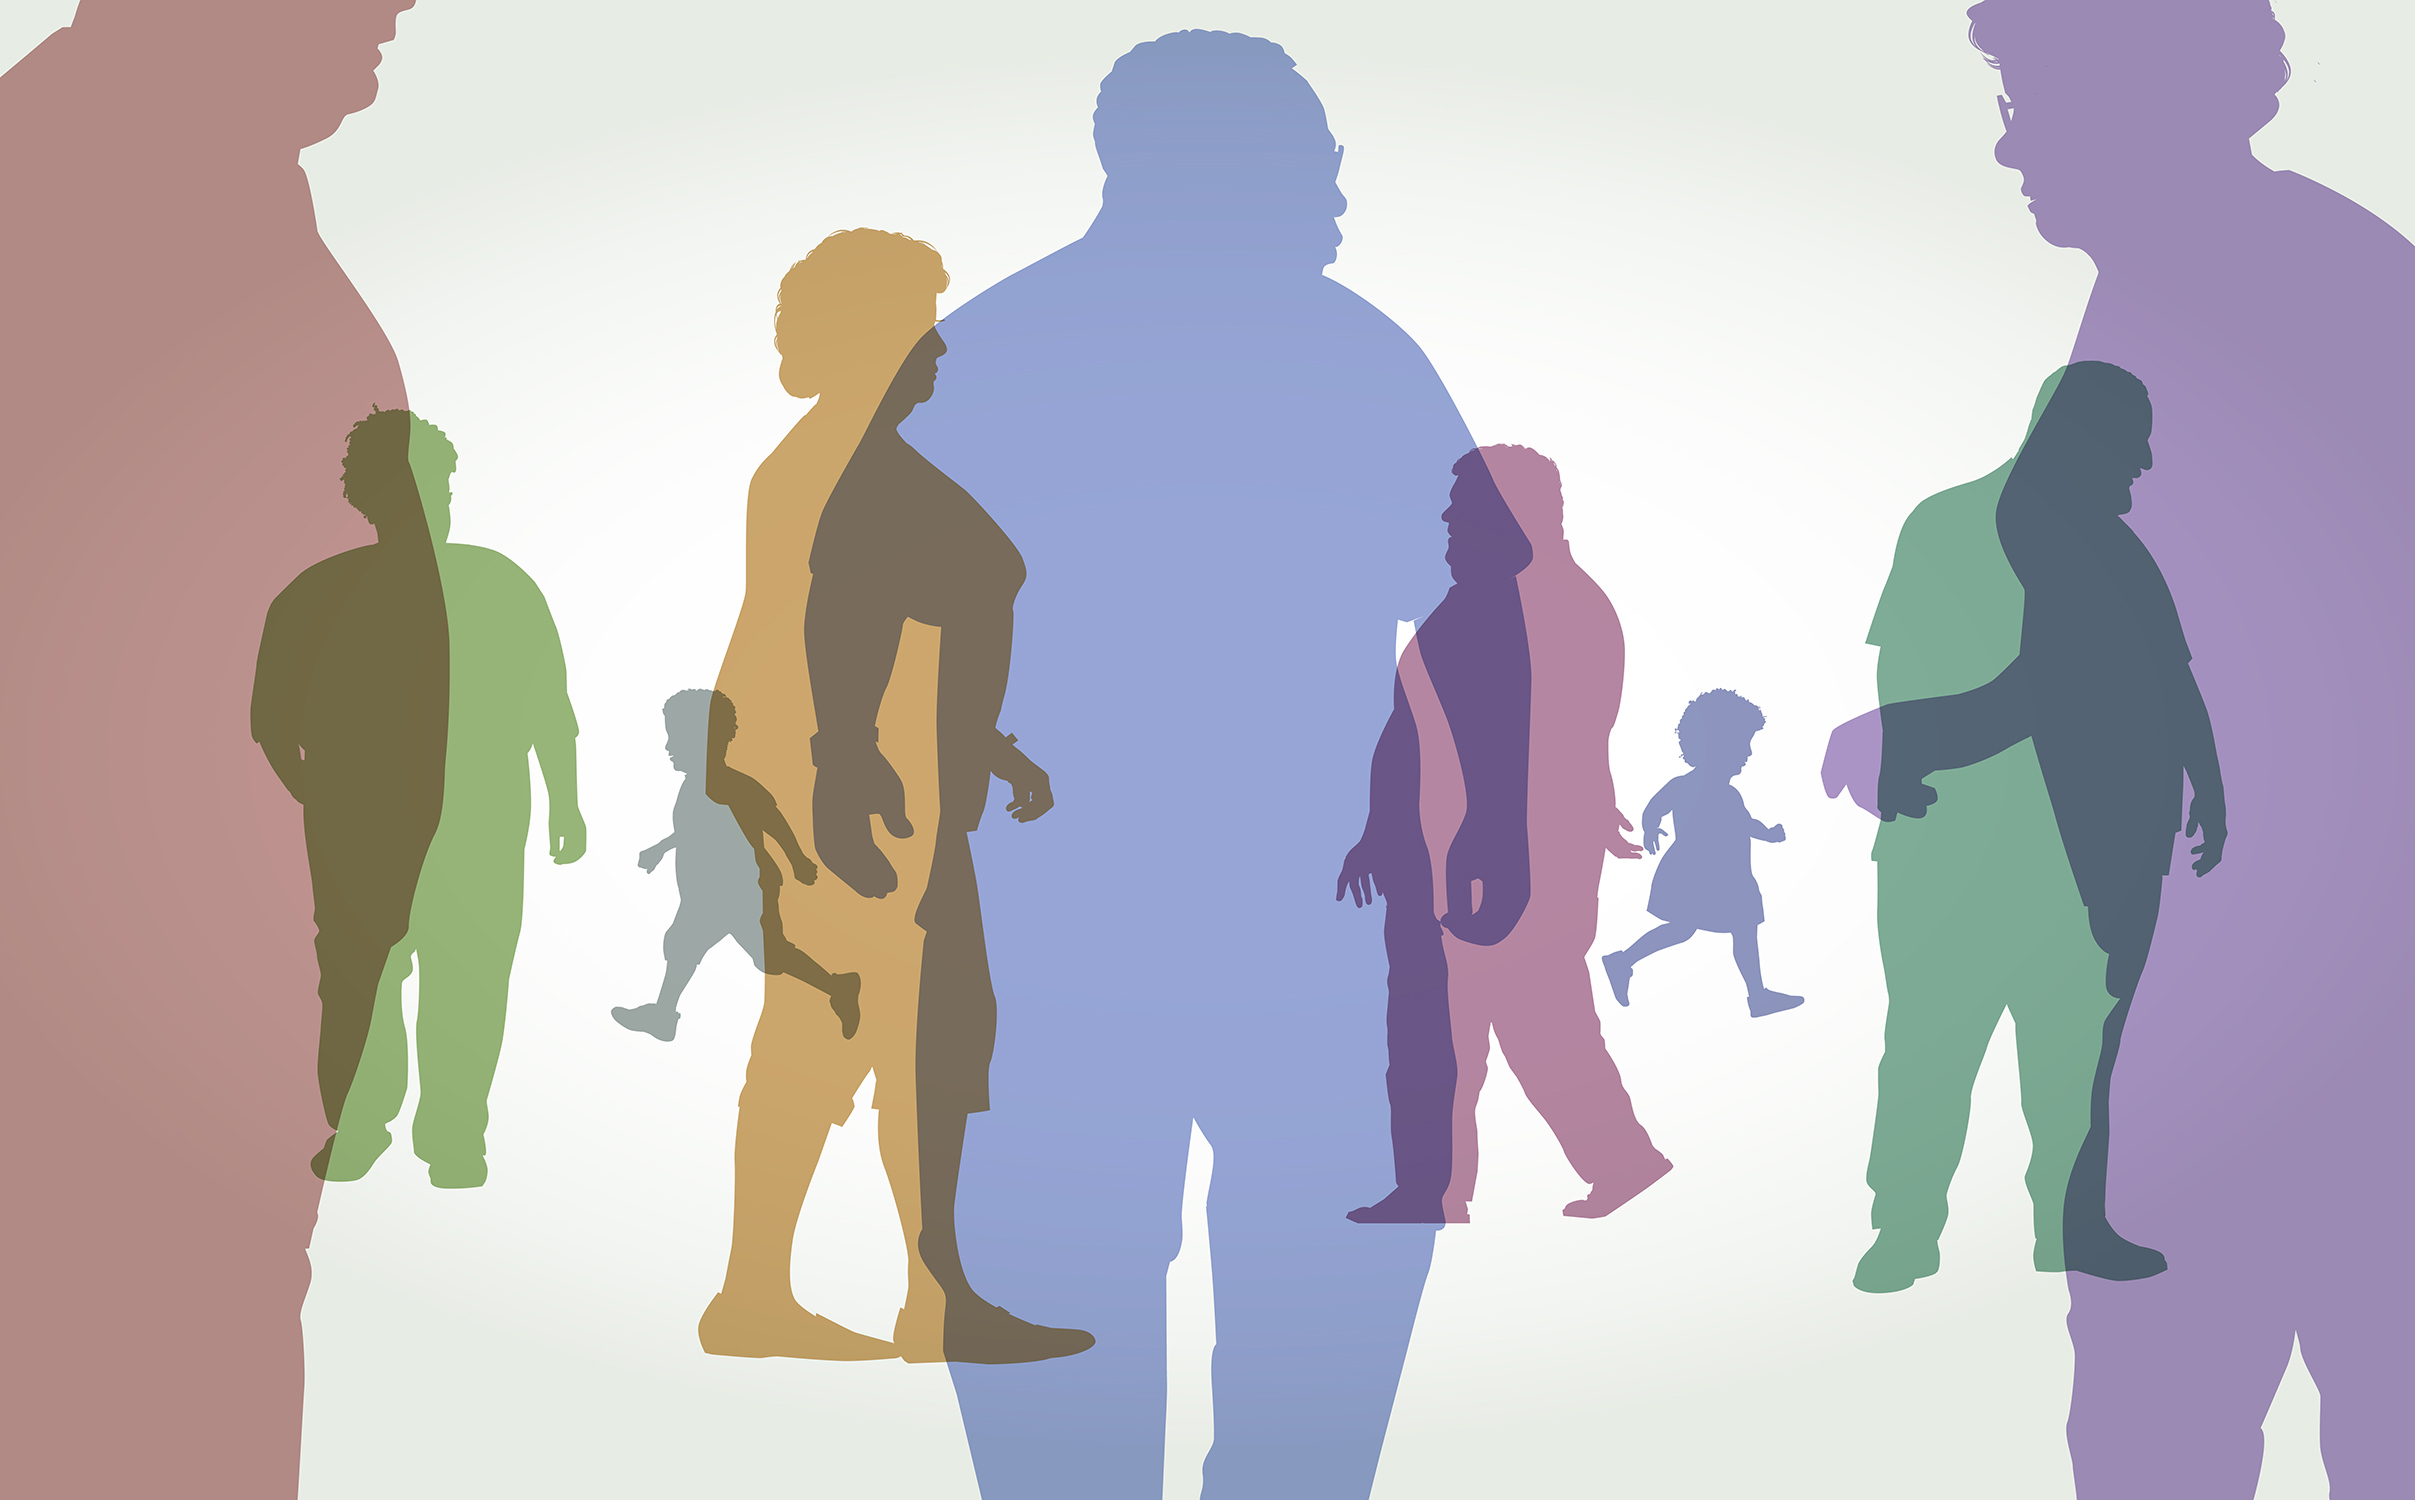 Colorful silhouettes of people with weight issues